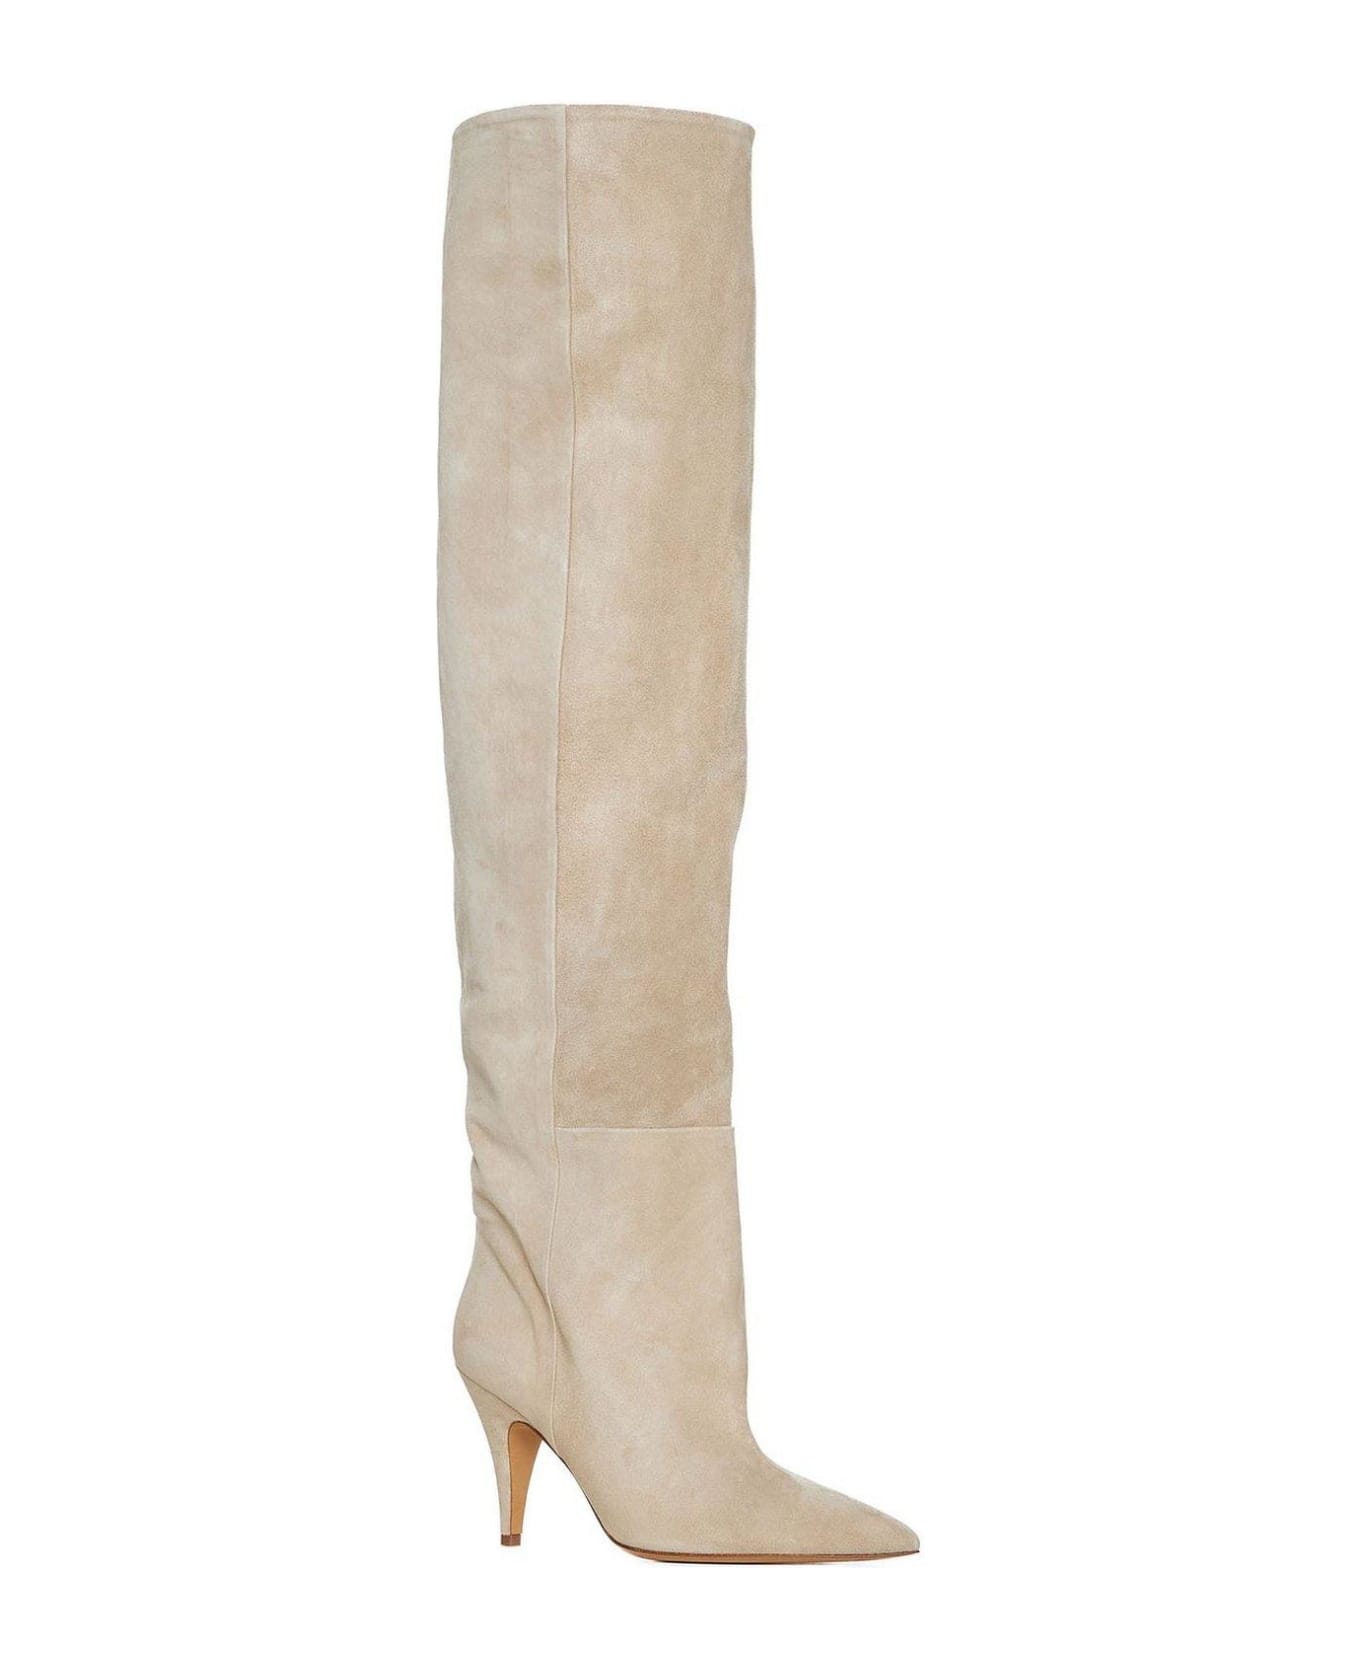 Khaite The River Pointed-toe Knee-high Boots - NUDE ブーツ